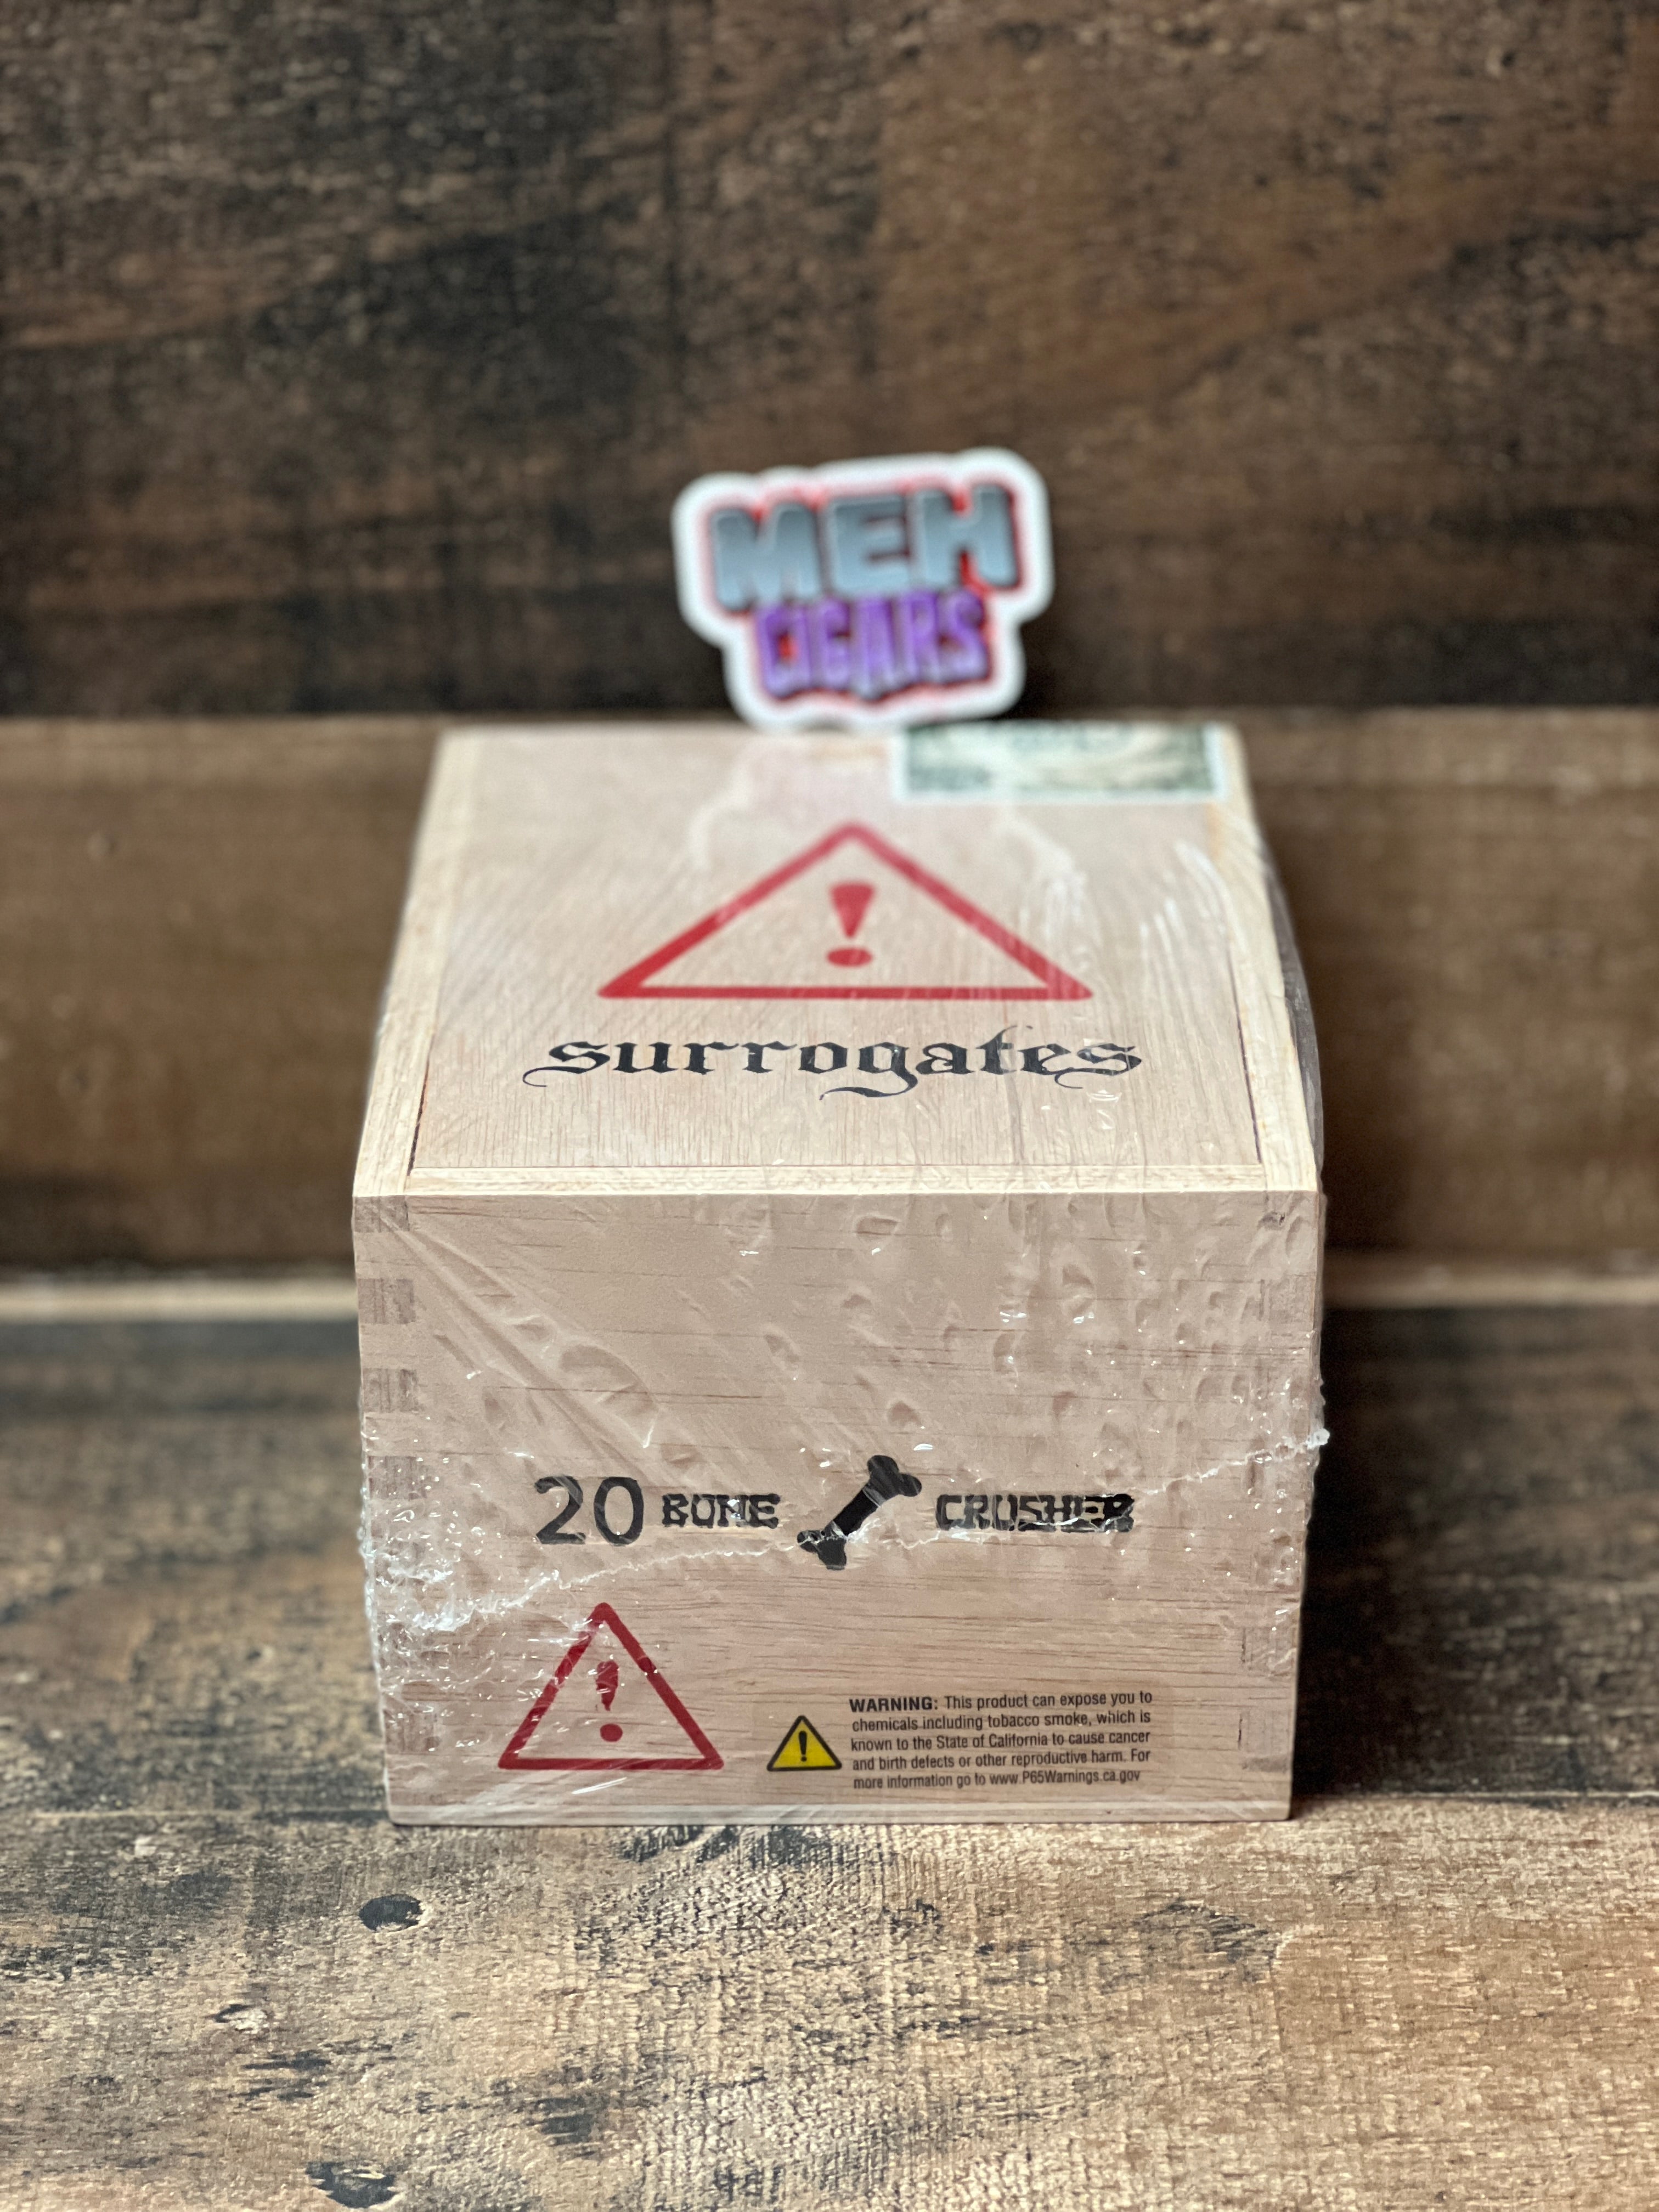 Surrogates Bone Crusher by L'Atelier Imports bx of 20